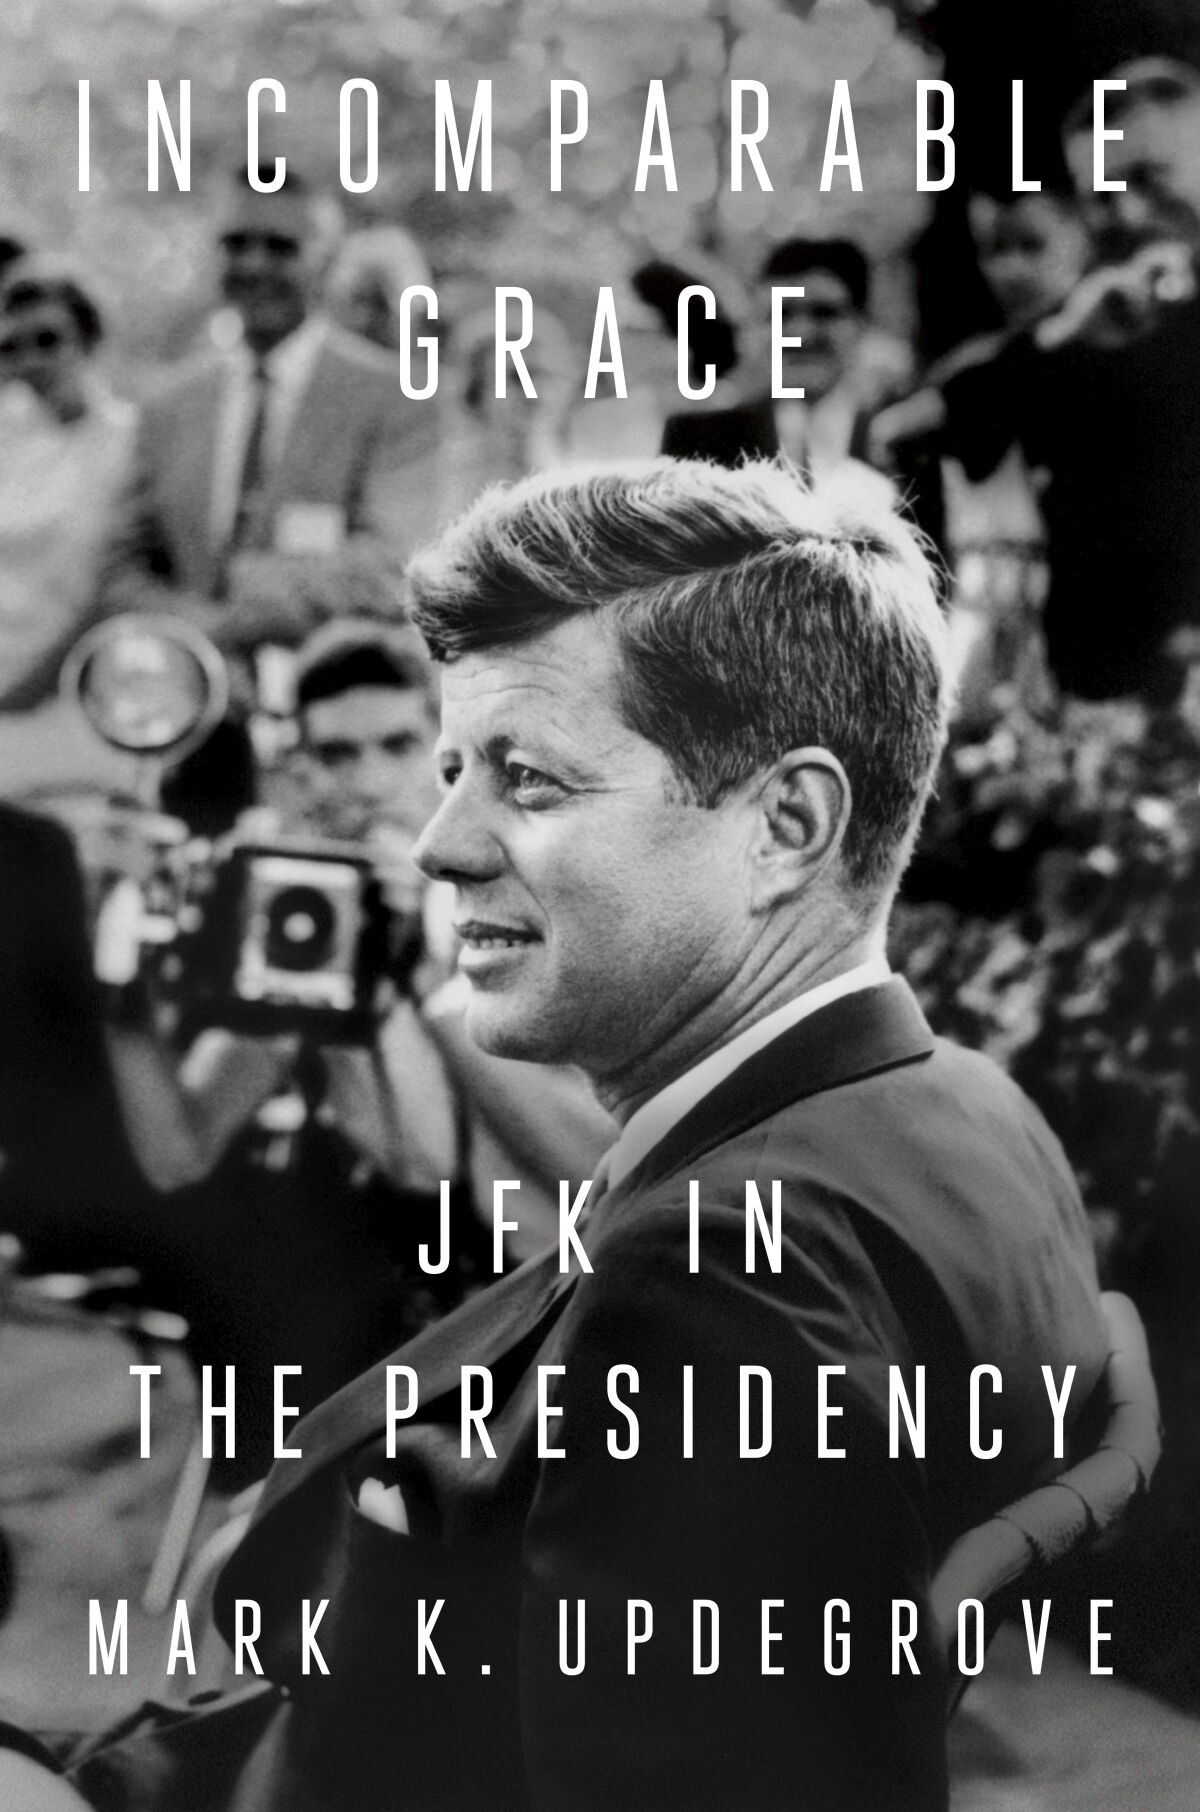 This cover image released by Dutton shows "Incomparable Grace: JFK in the Presidency" by Mark K. Updegrove. (Dutton via AP)